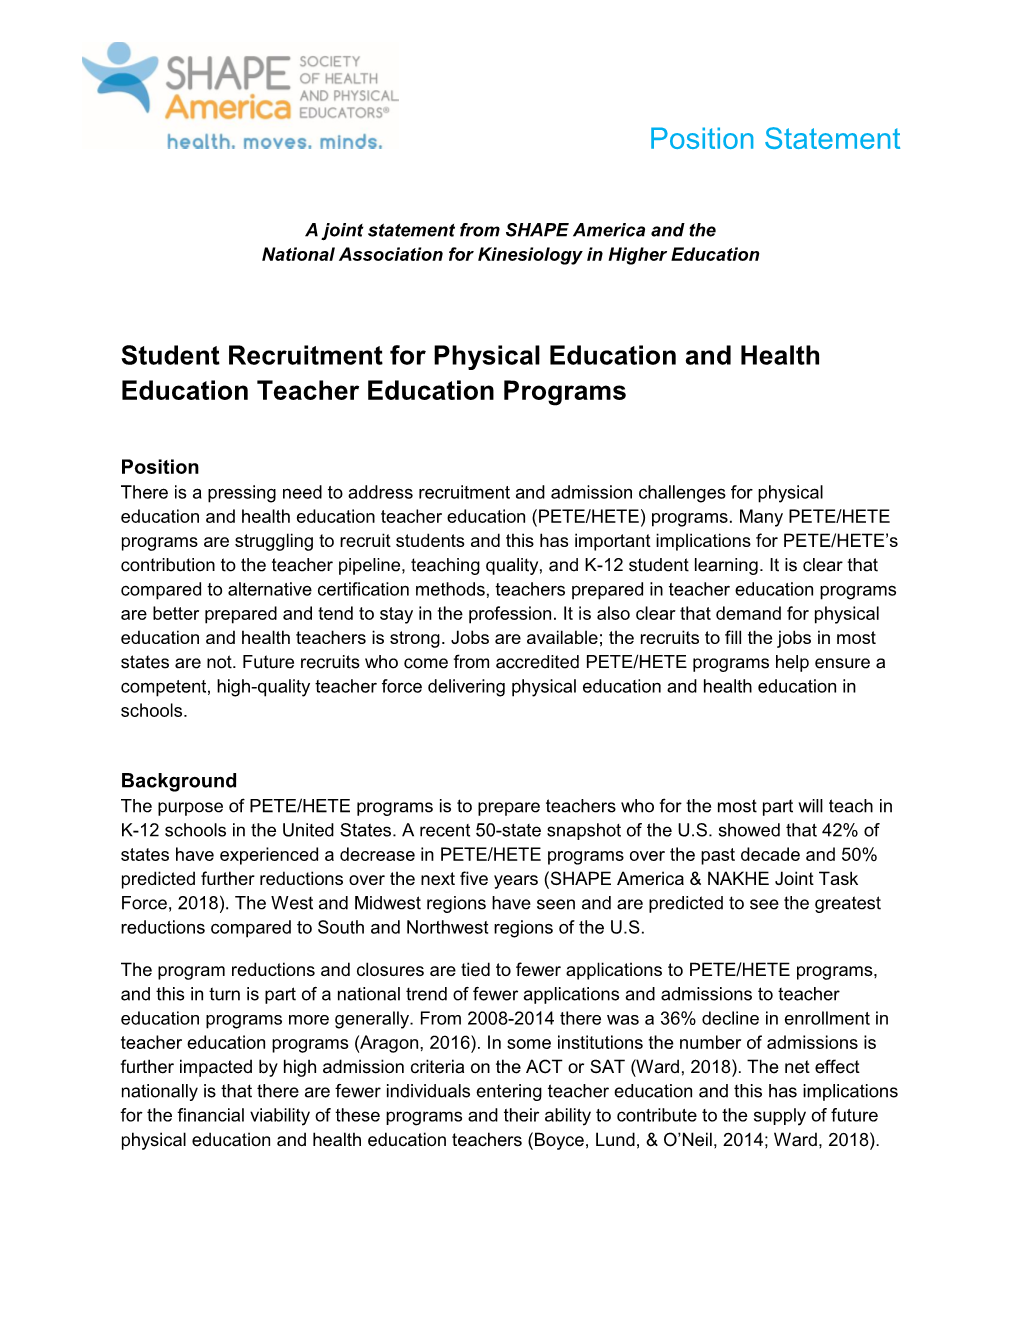 Student Recruitment for Physical Education and Health Education Teacher Education Programs